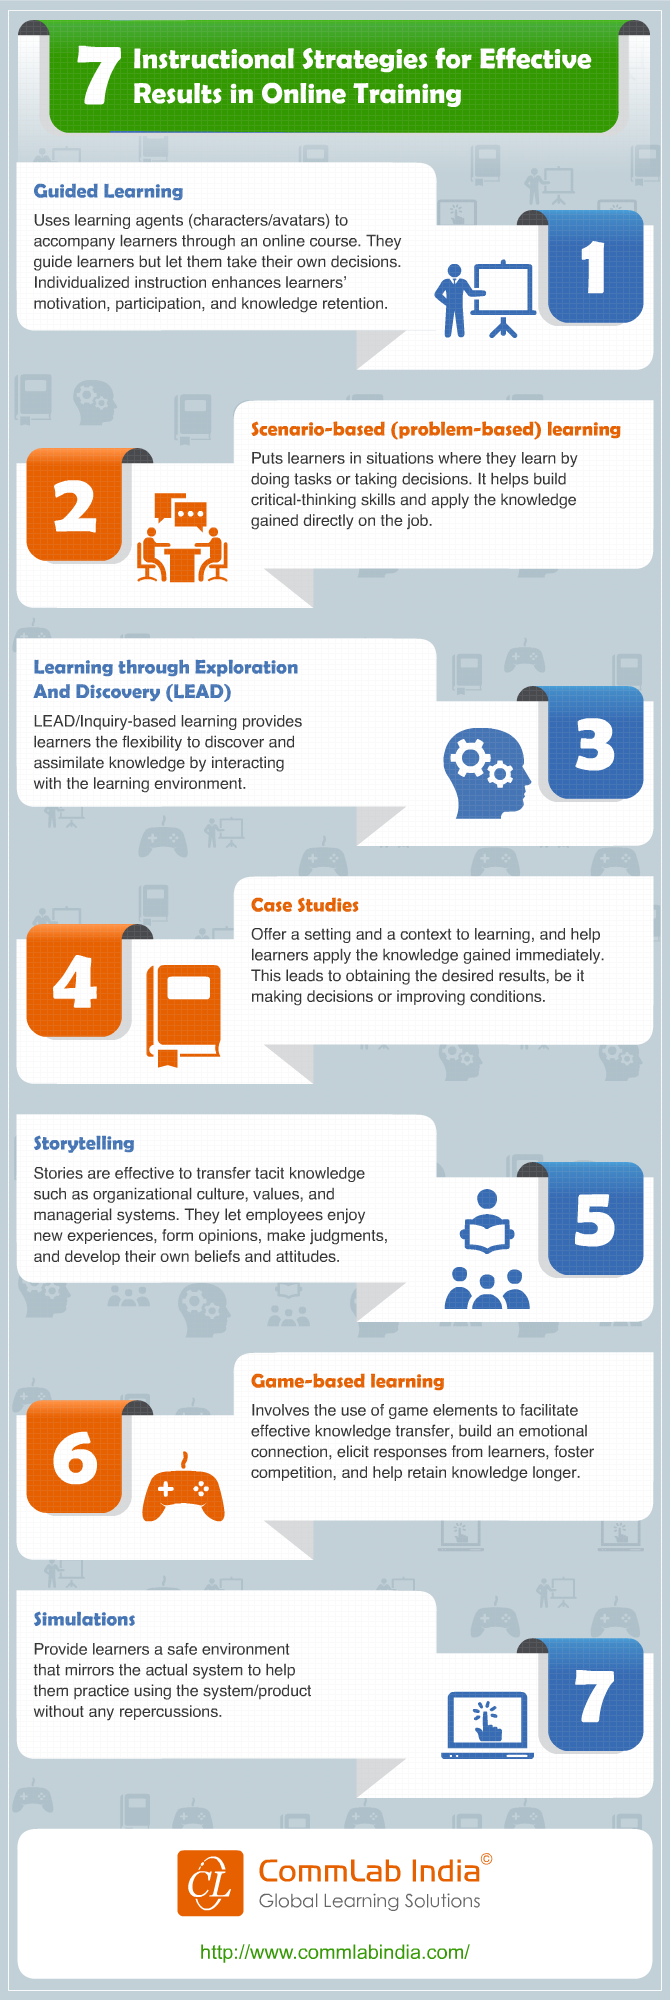 7 Instructional Strategies for Effective Results in Online Training [Infographic]